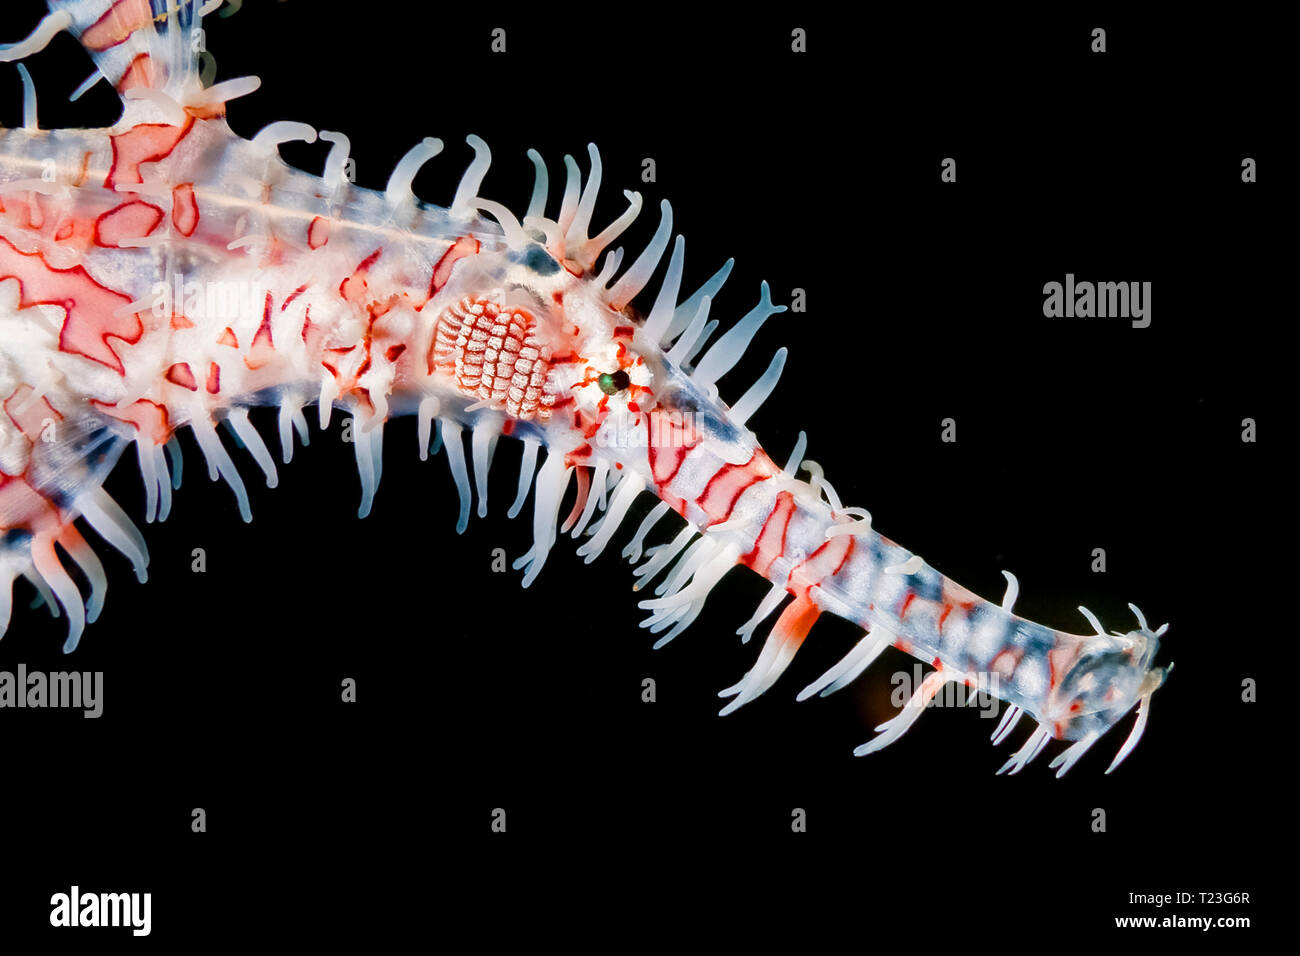 Portrait of Ornate ghost pipefish or harlequin ghost pipefish, Solenostomus paradoxus, Anilao, Batangas, Philippines, South China Sea, Pacific Ocean Stock Photo